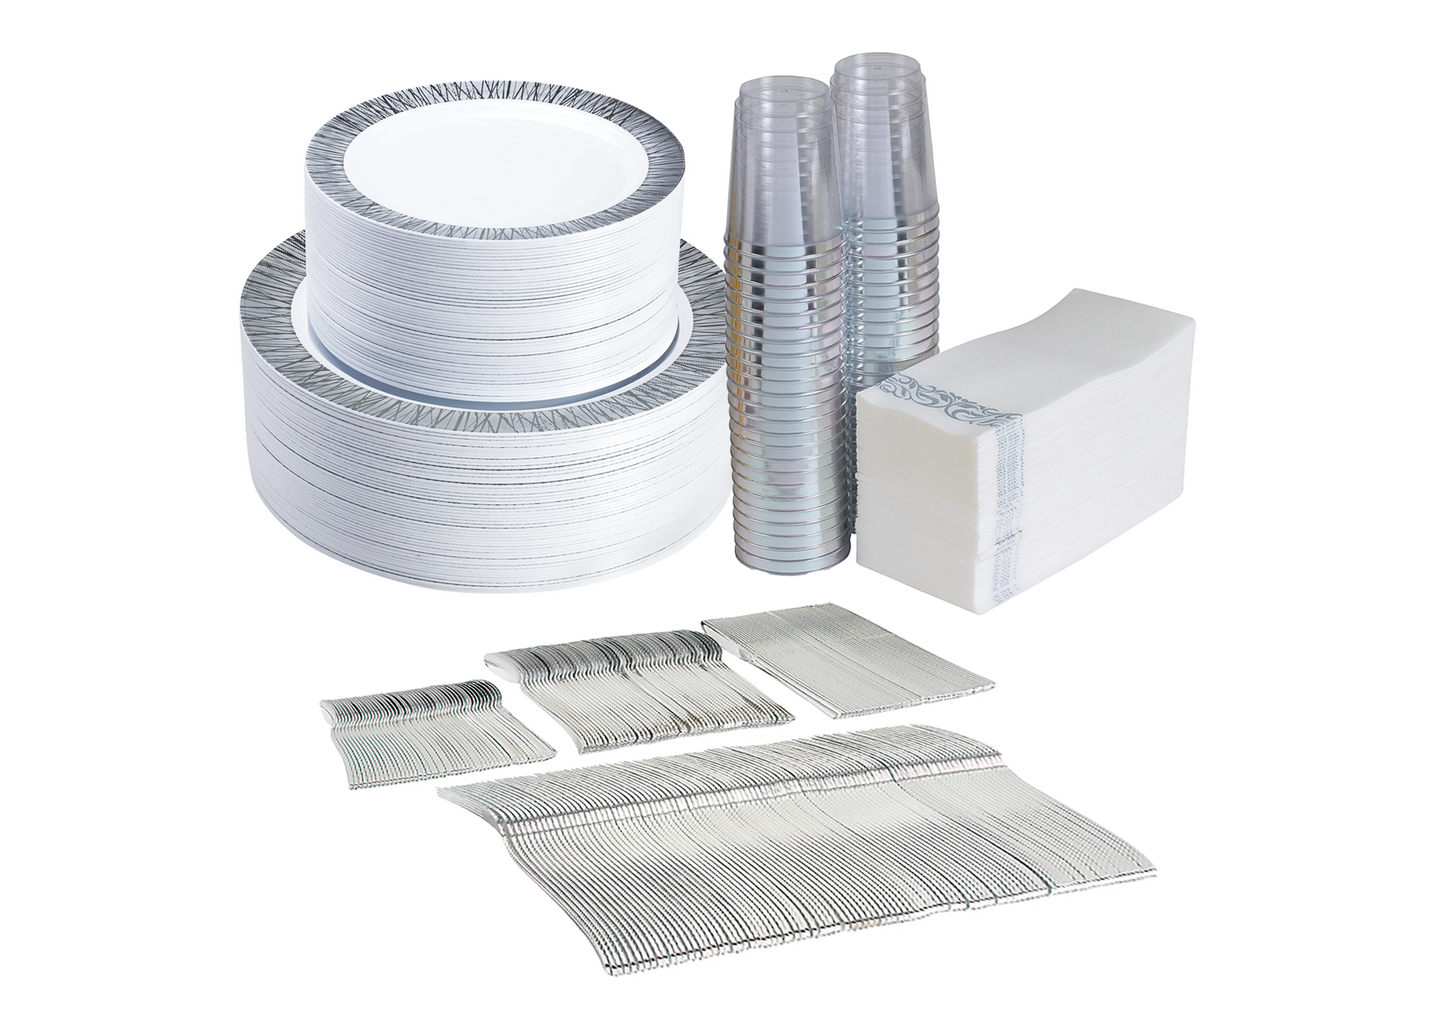 450 -Piece Silver dinnerware set for 50 guests Includes: 100 silver design plastic plates, 250 plastic silverware utensils, 50 napkins & 50 cups